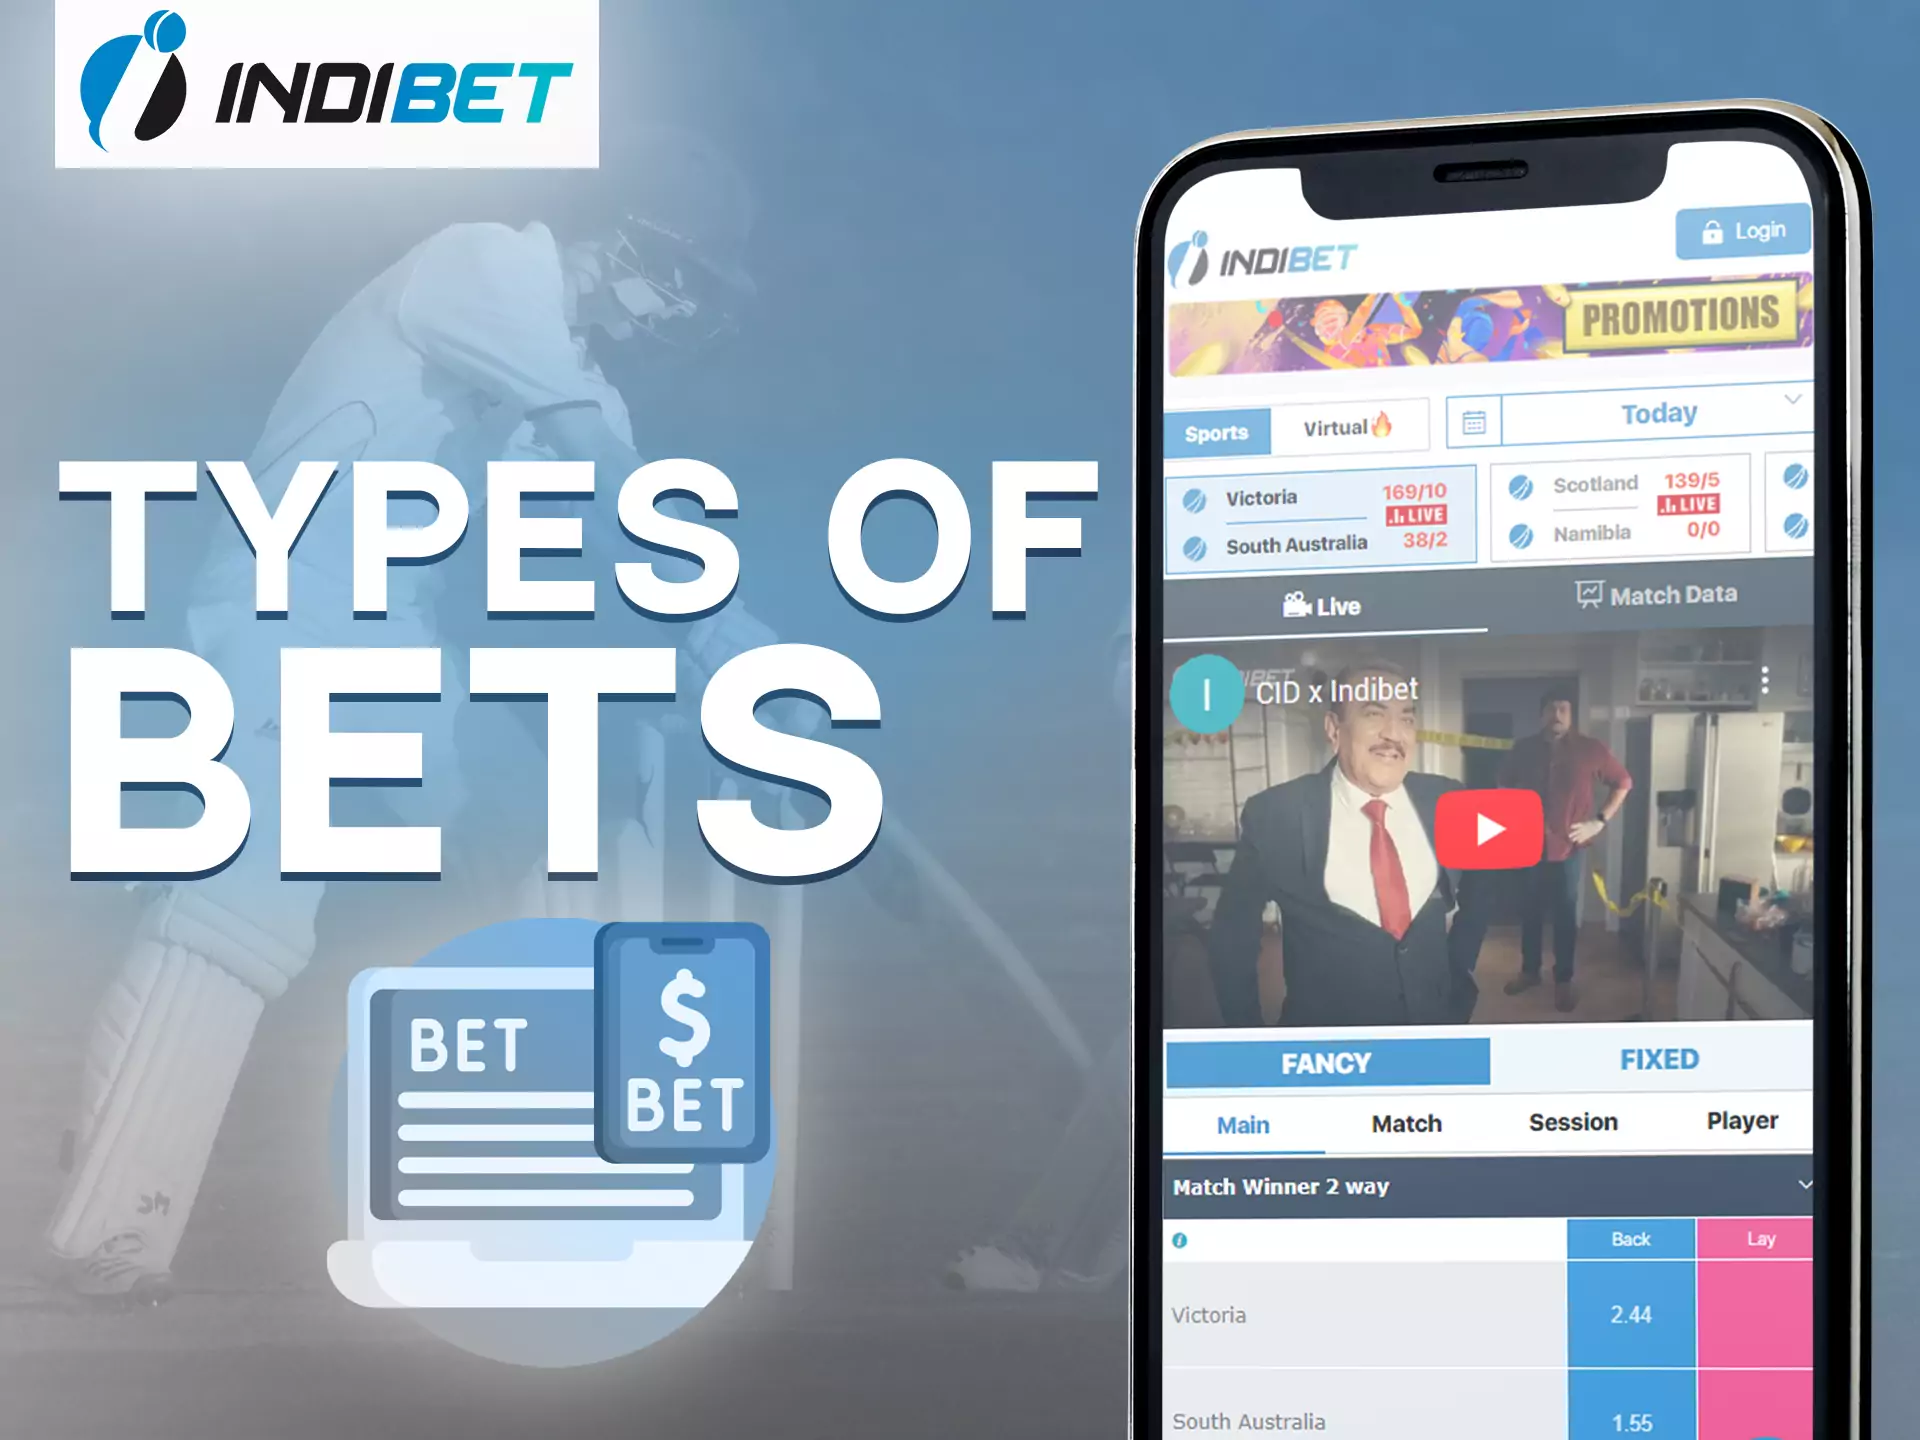 Make your own bet at Indibet.